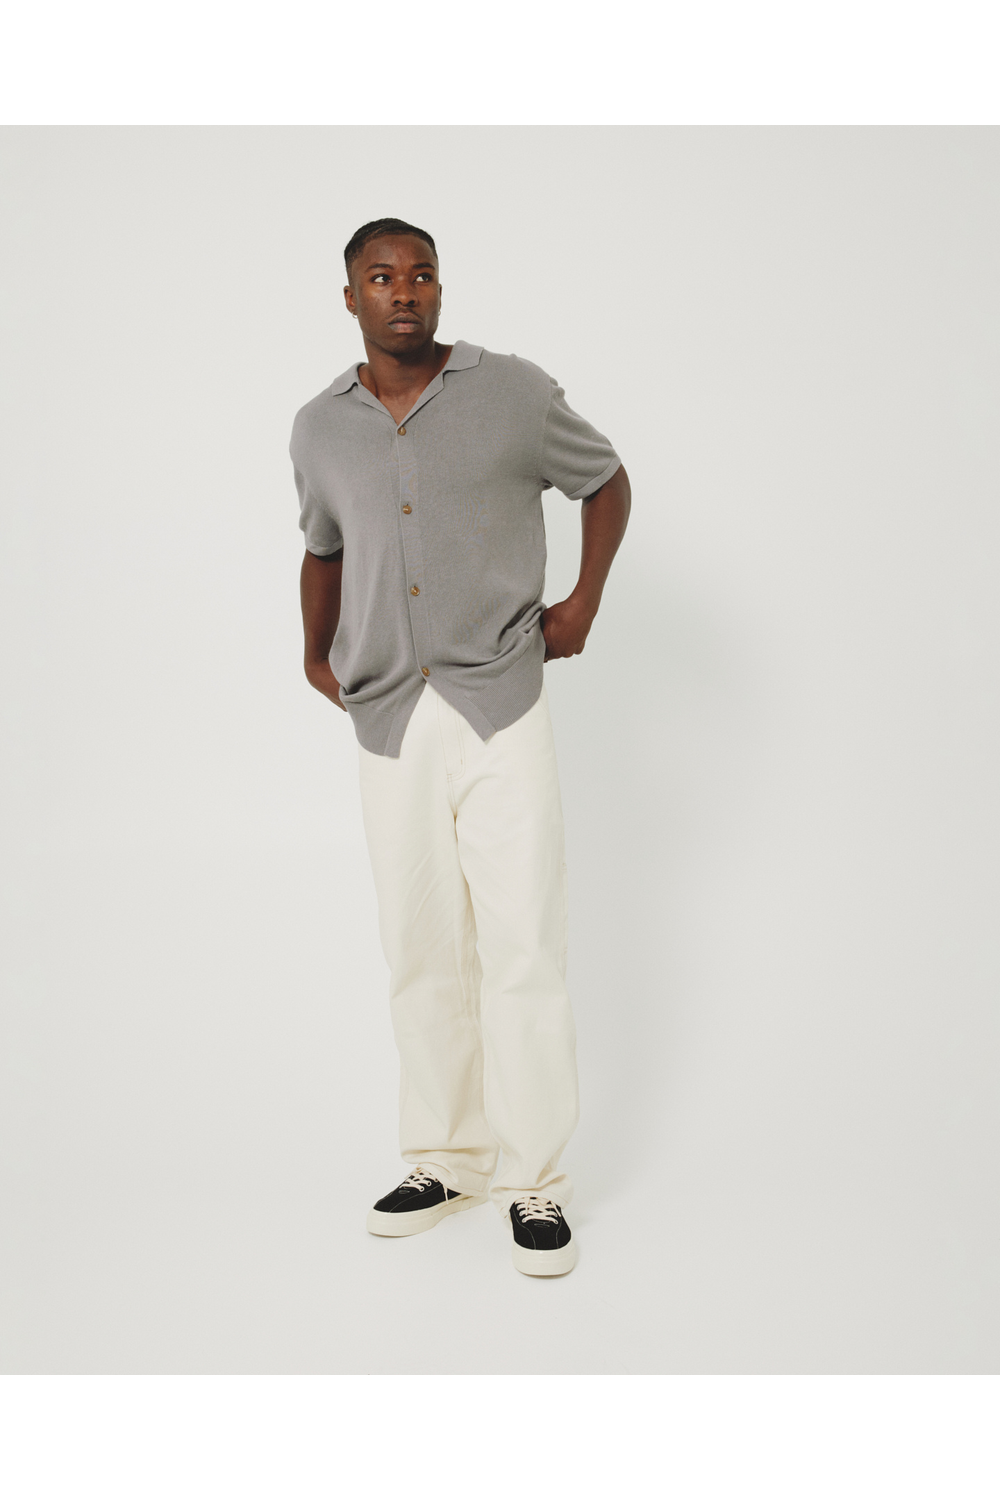 CAMPER KNIT SS SHIRT / ASH | Kore Studios | Mad About The Boy